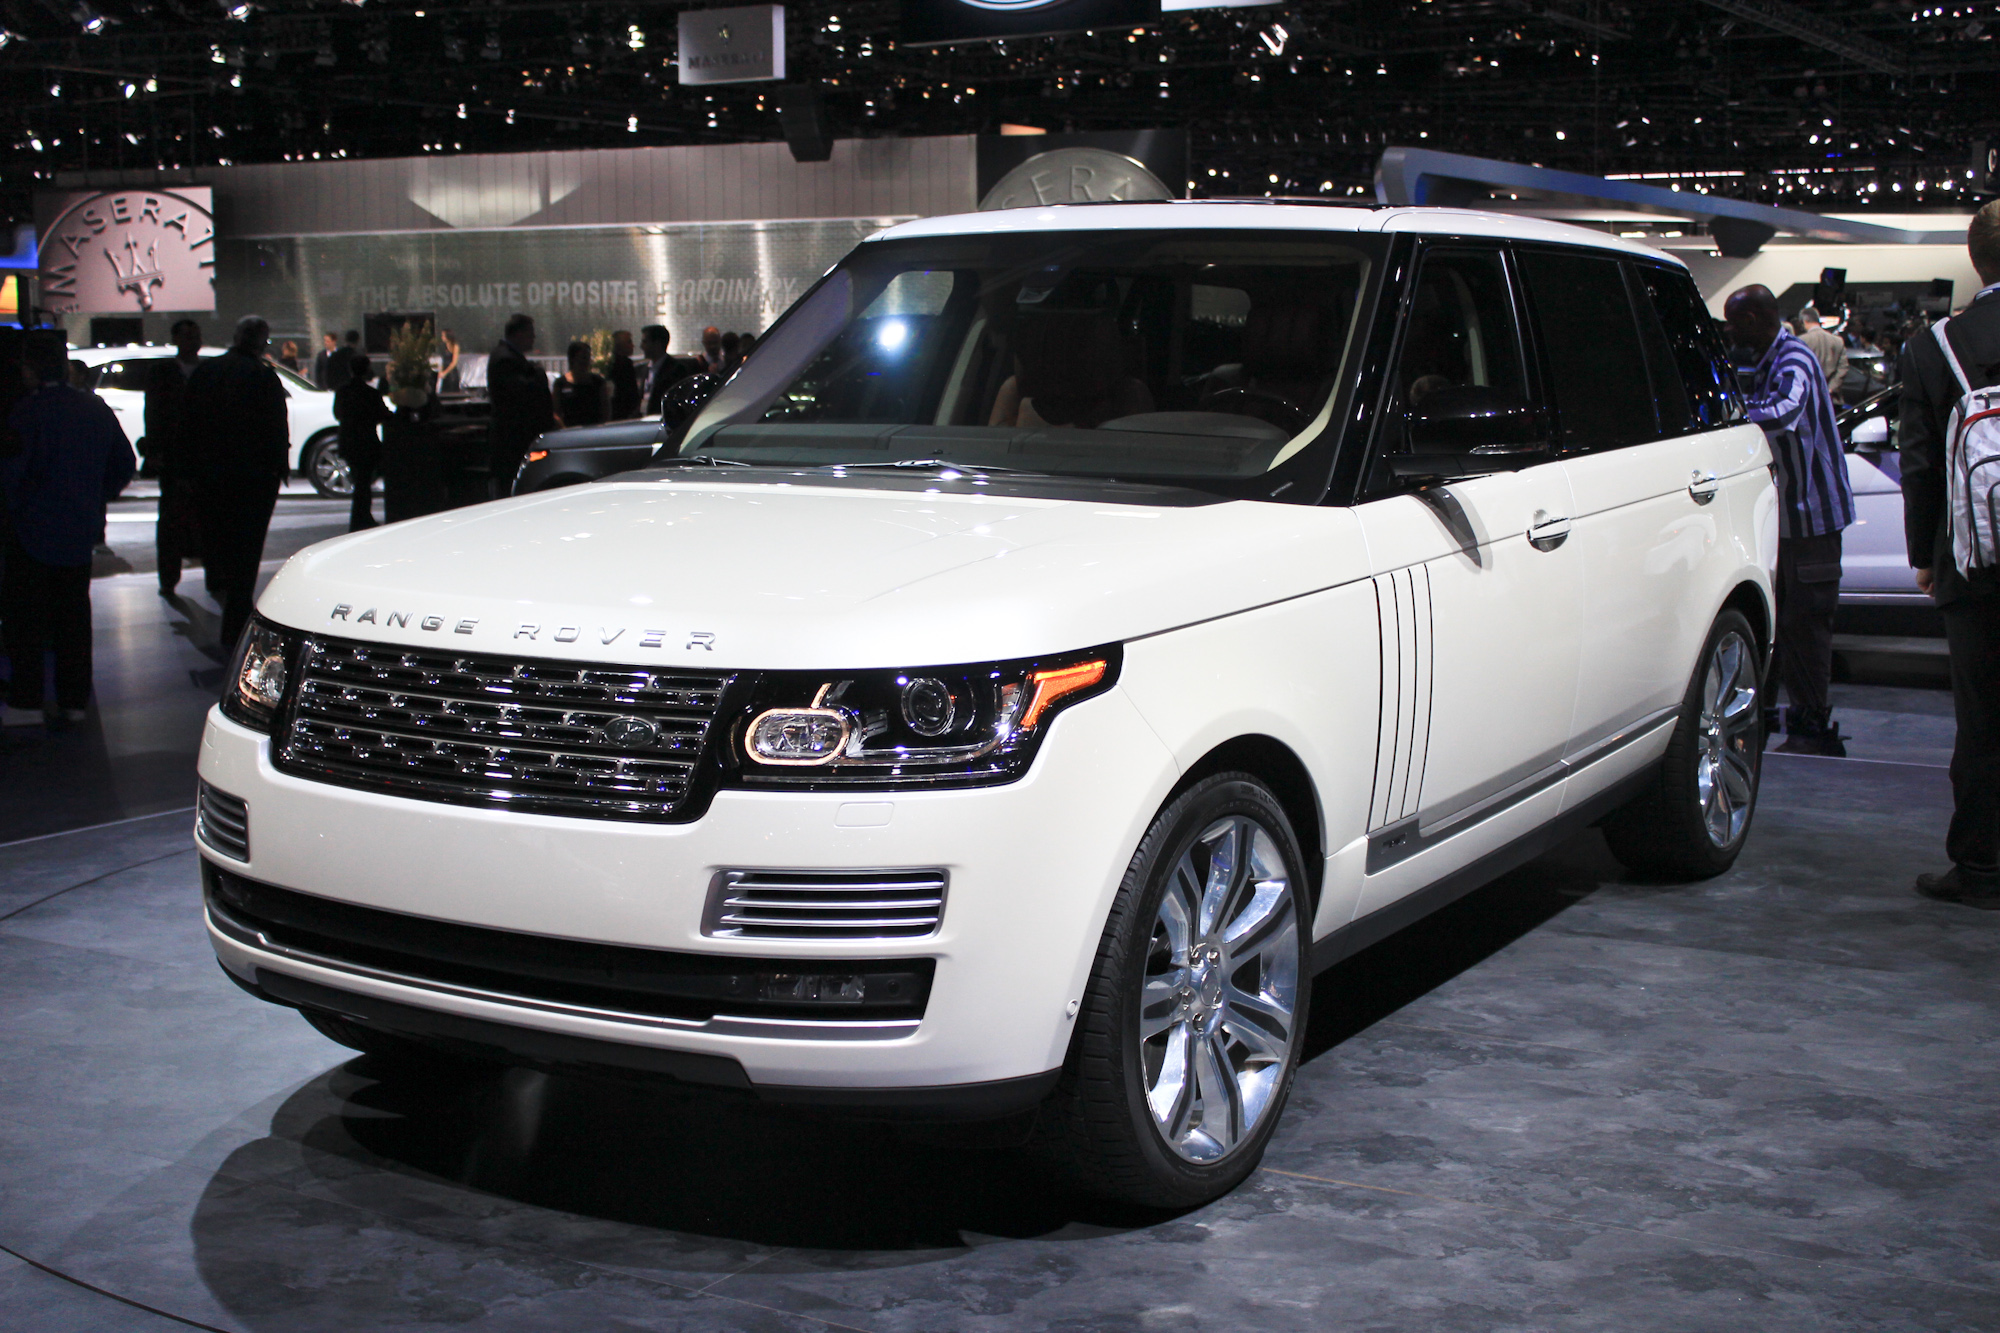 Range Rover Autobiography New Shape  - Part Of The Fourth Range Rover Generation Introduced For 2013.